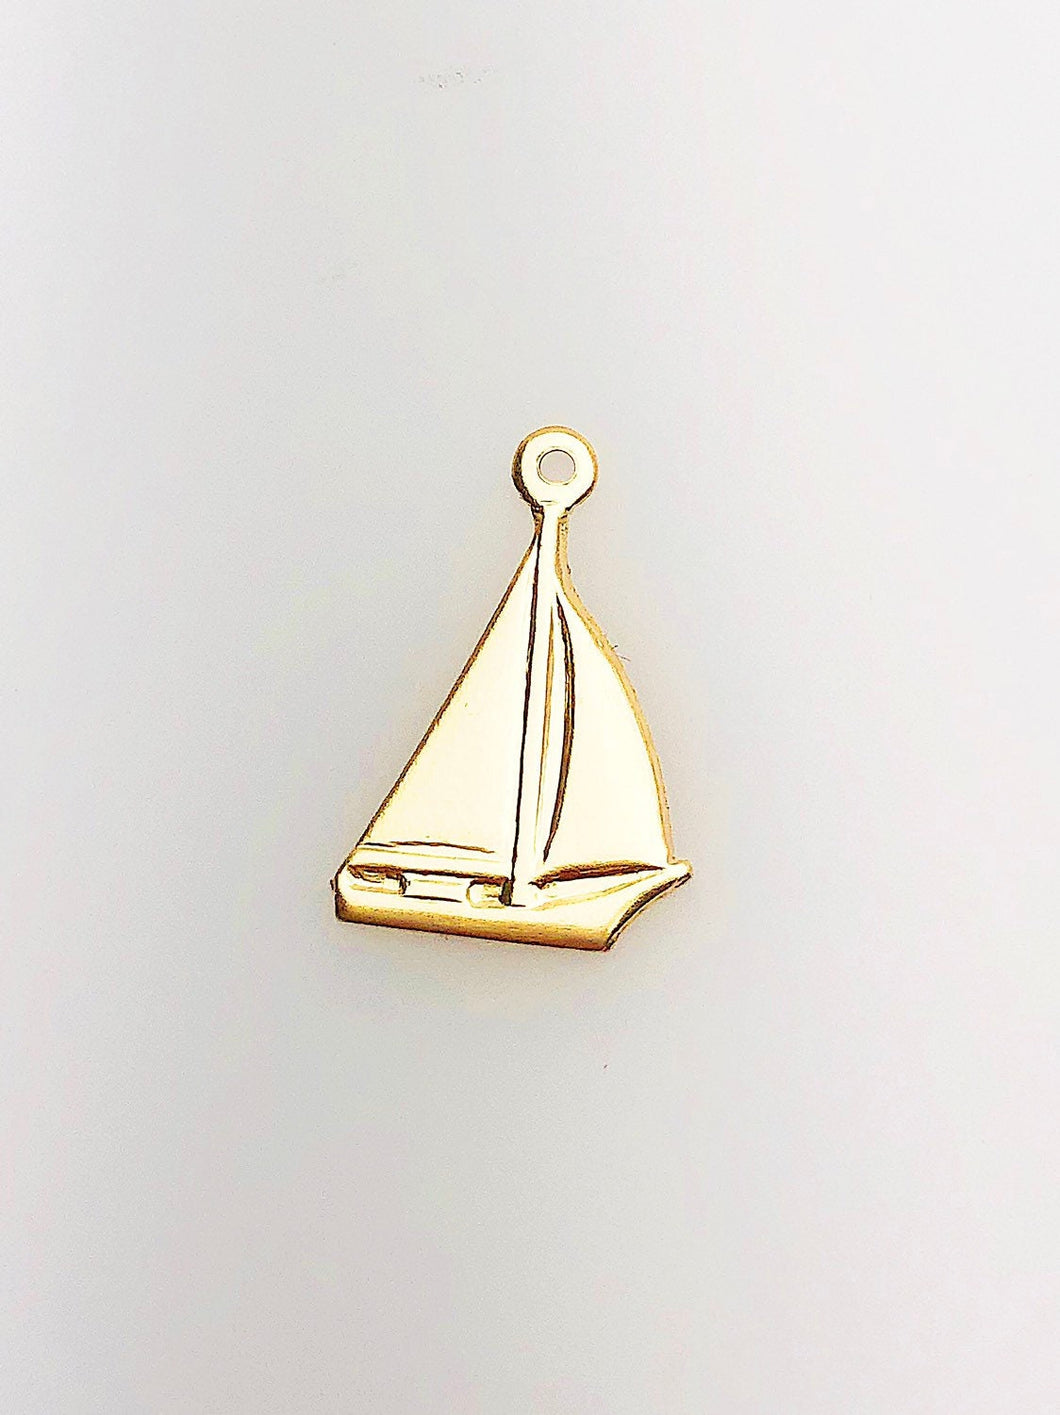 14K Gold Fill Sailboat Charm w/ Ring, 10.0mm, Made in USA - 639